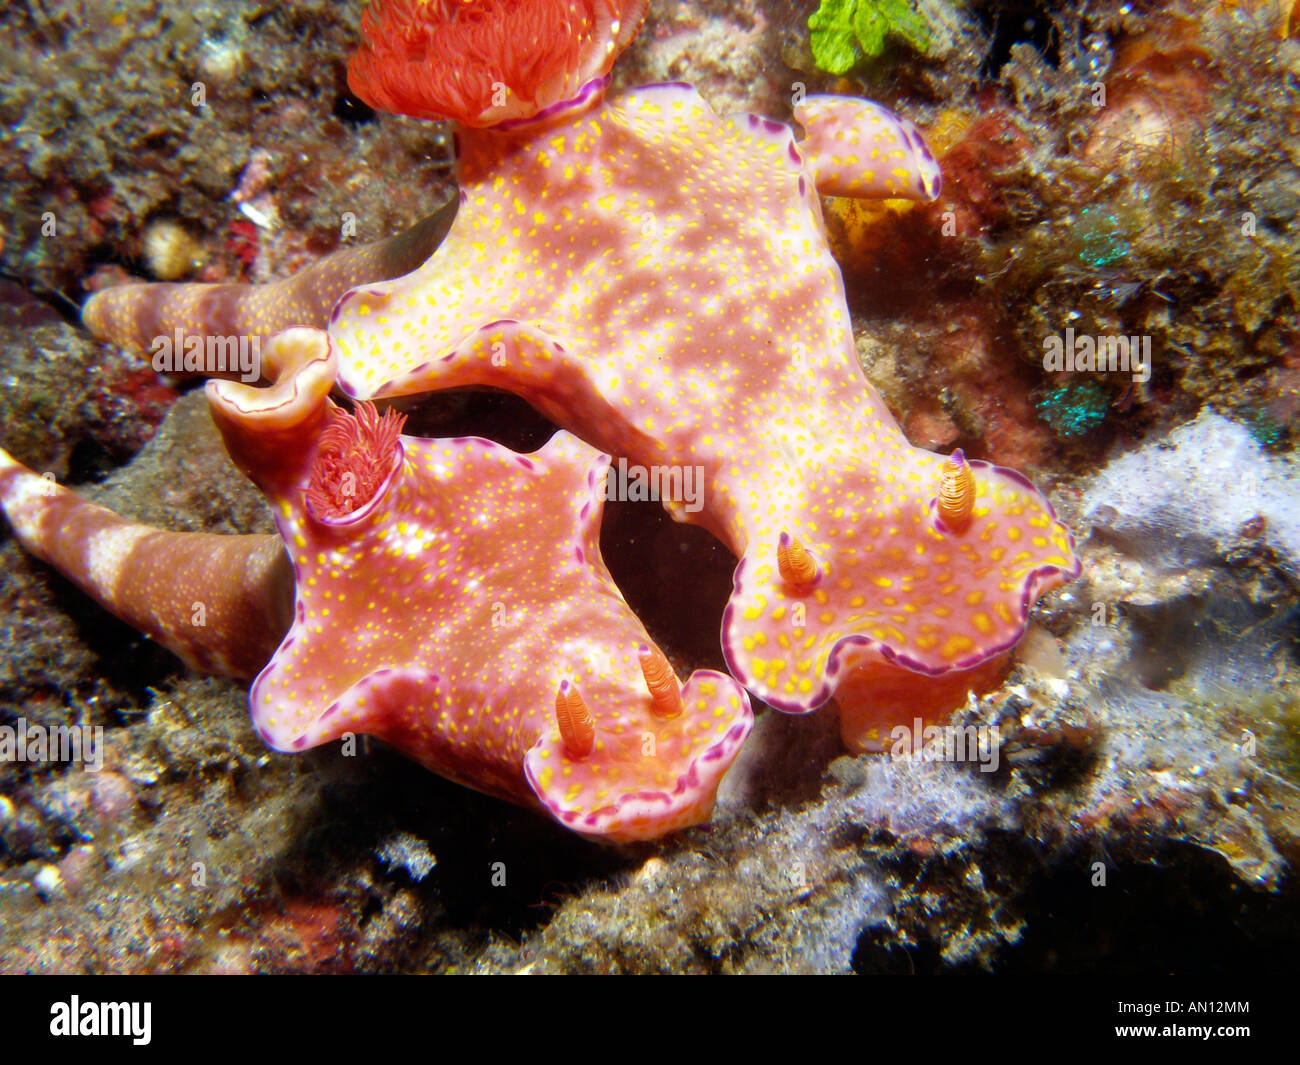 Two colourful nudibranchs, ceratosoma tenue, or seaslugs, in the Lembeh Strait region of North Sulawesi, Indonesia. Stock Photo